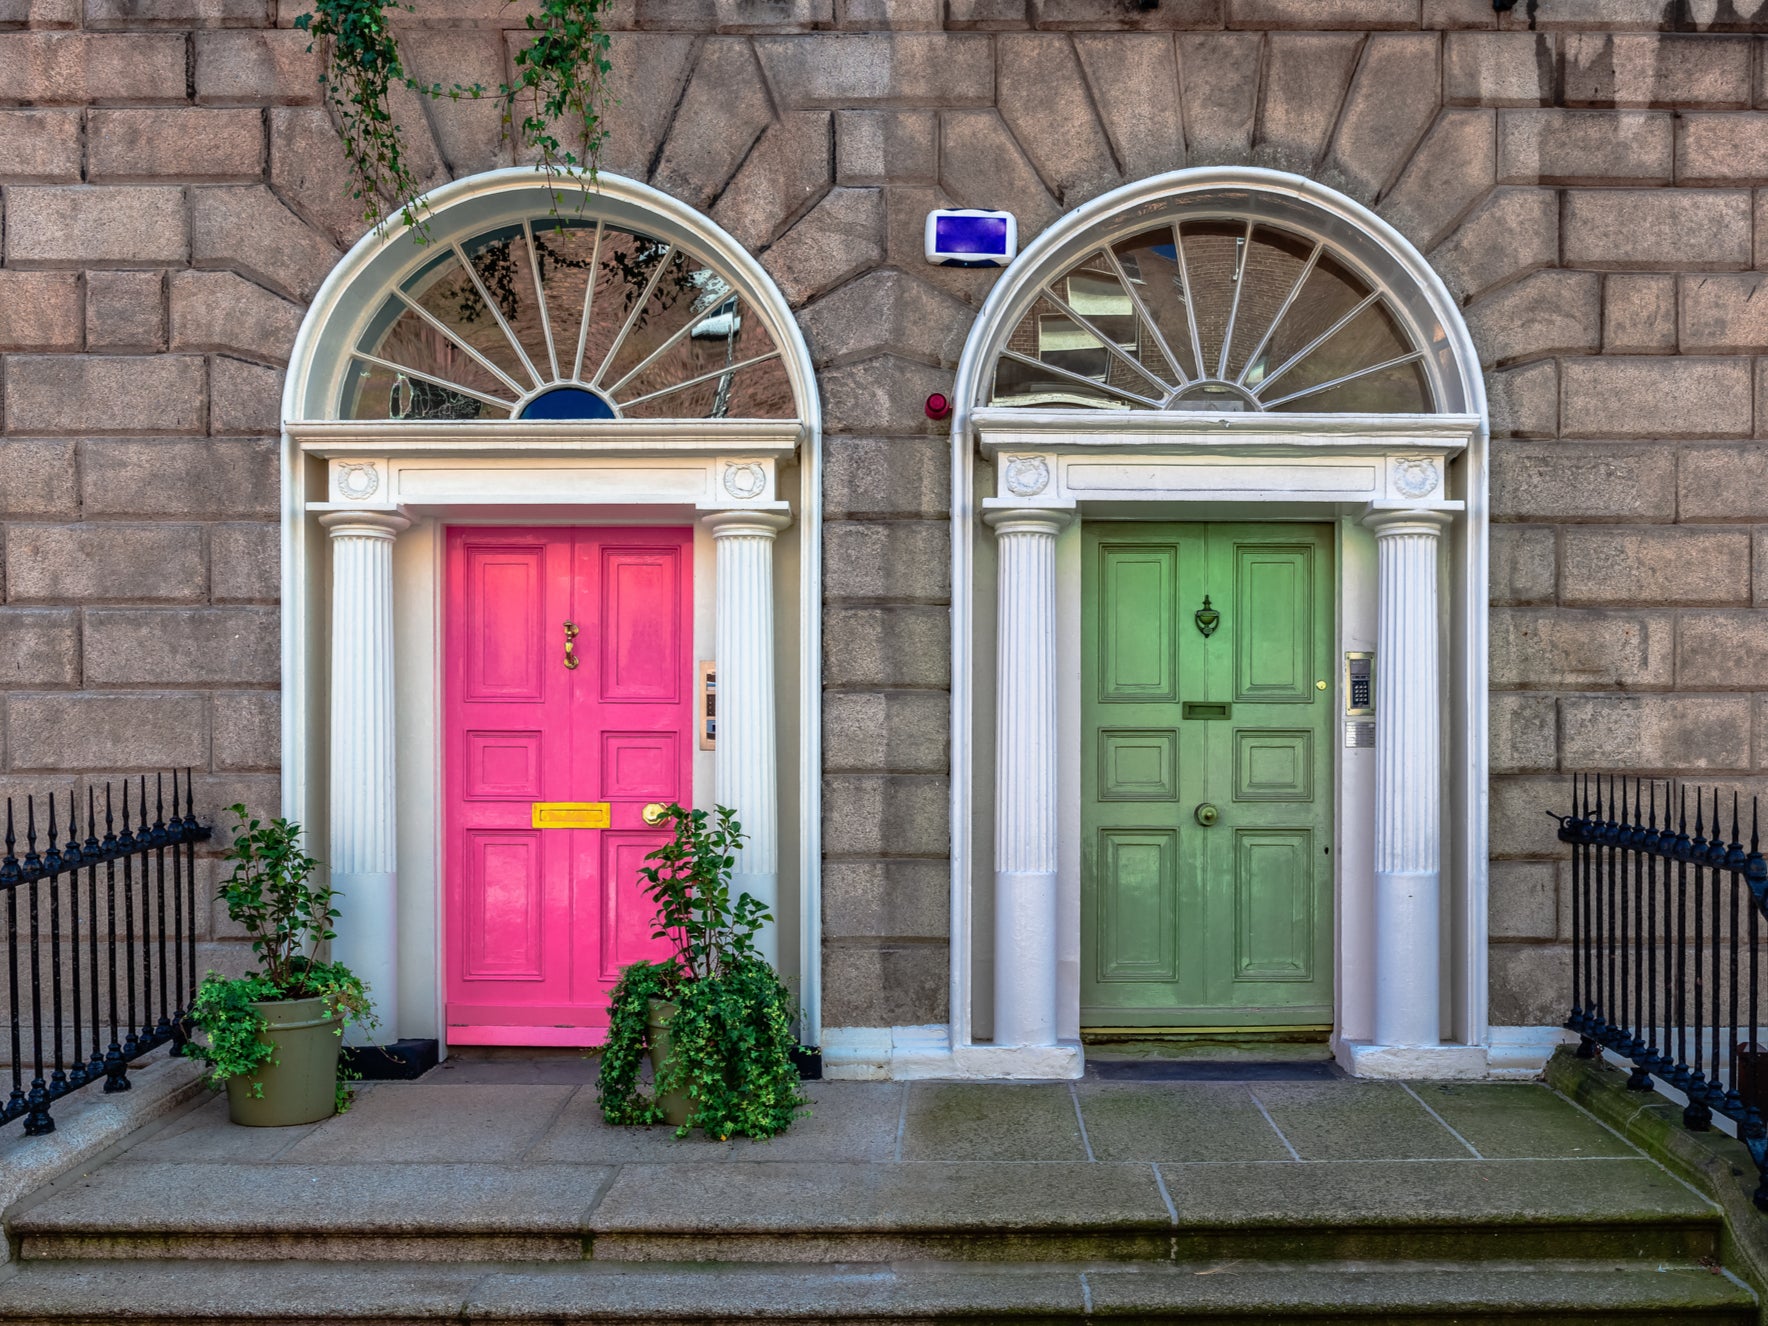 Is there really such a thing as a ‘too colourful’ front door?